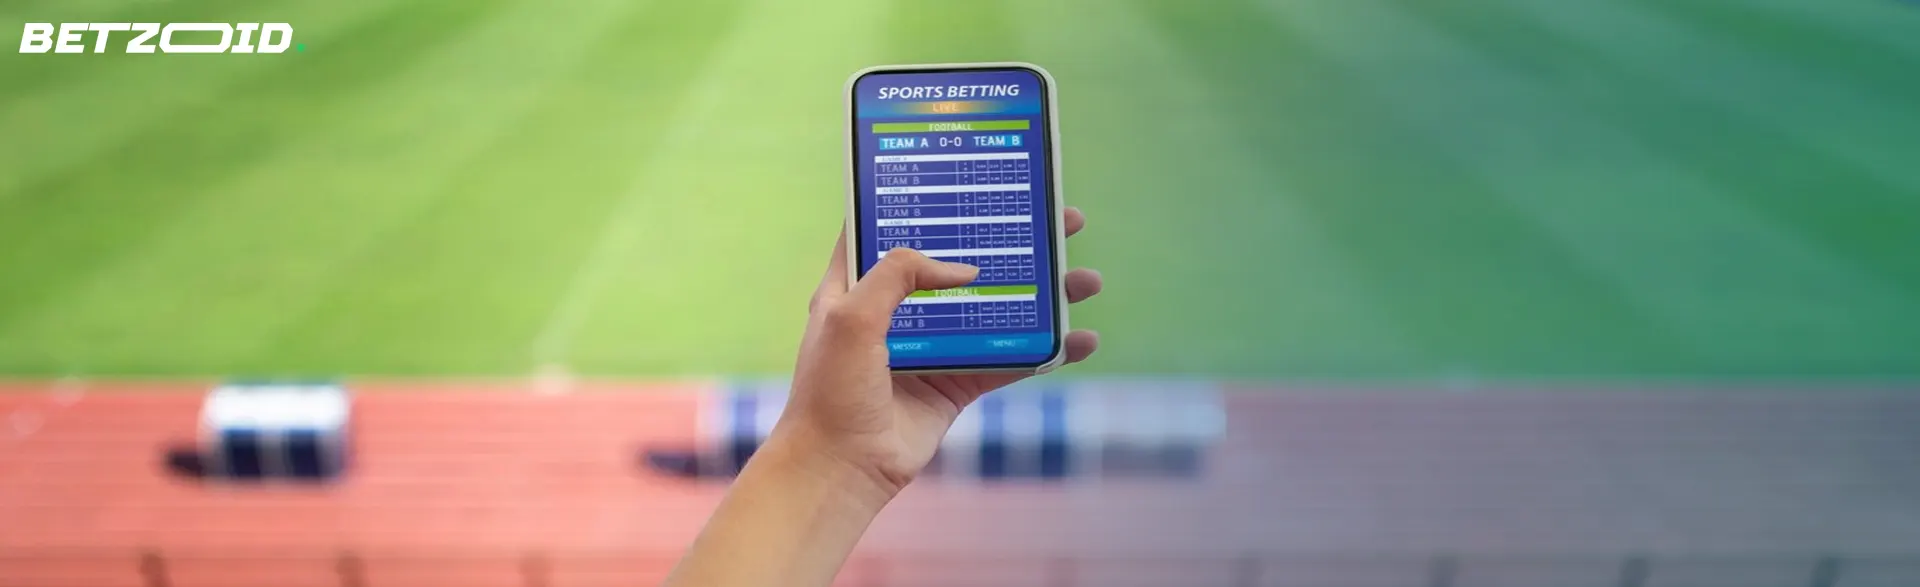 A hand holds a phone displaying soccer betting apps at a stadium.